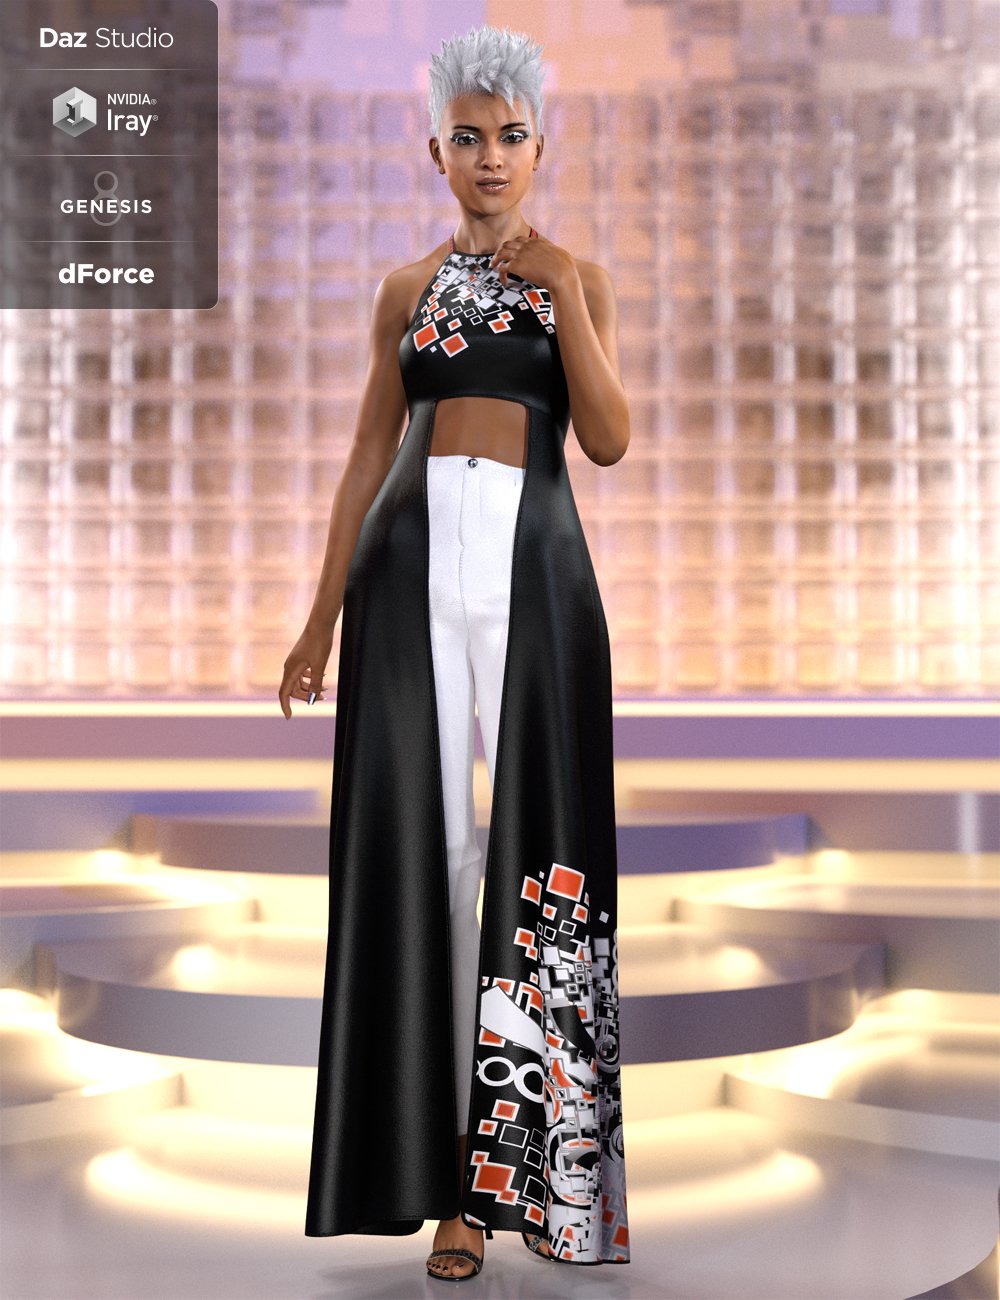 dForce Step it Up Outfit Textures by: Shox-Design, 3D Models by Daz 3D